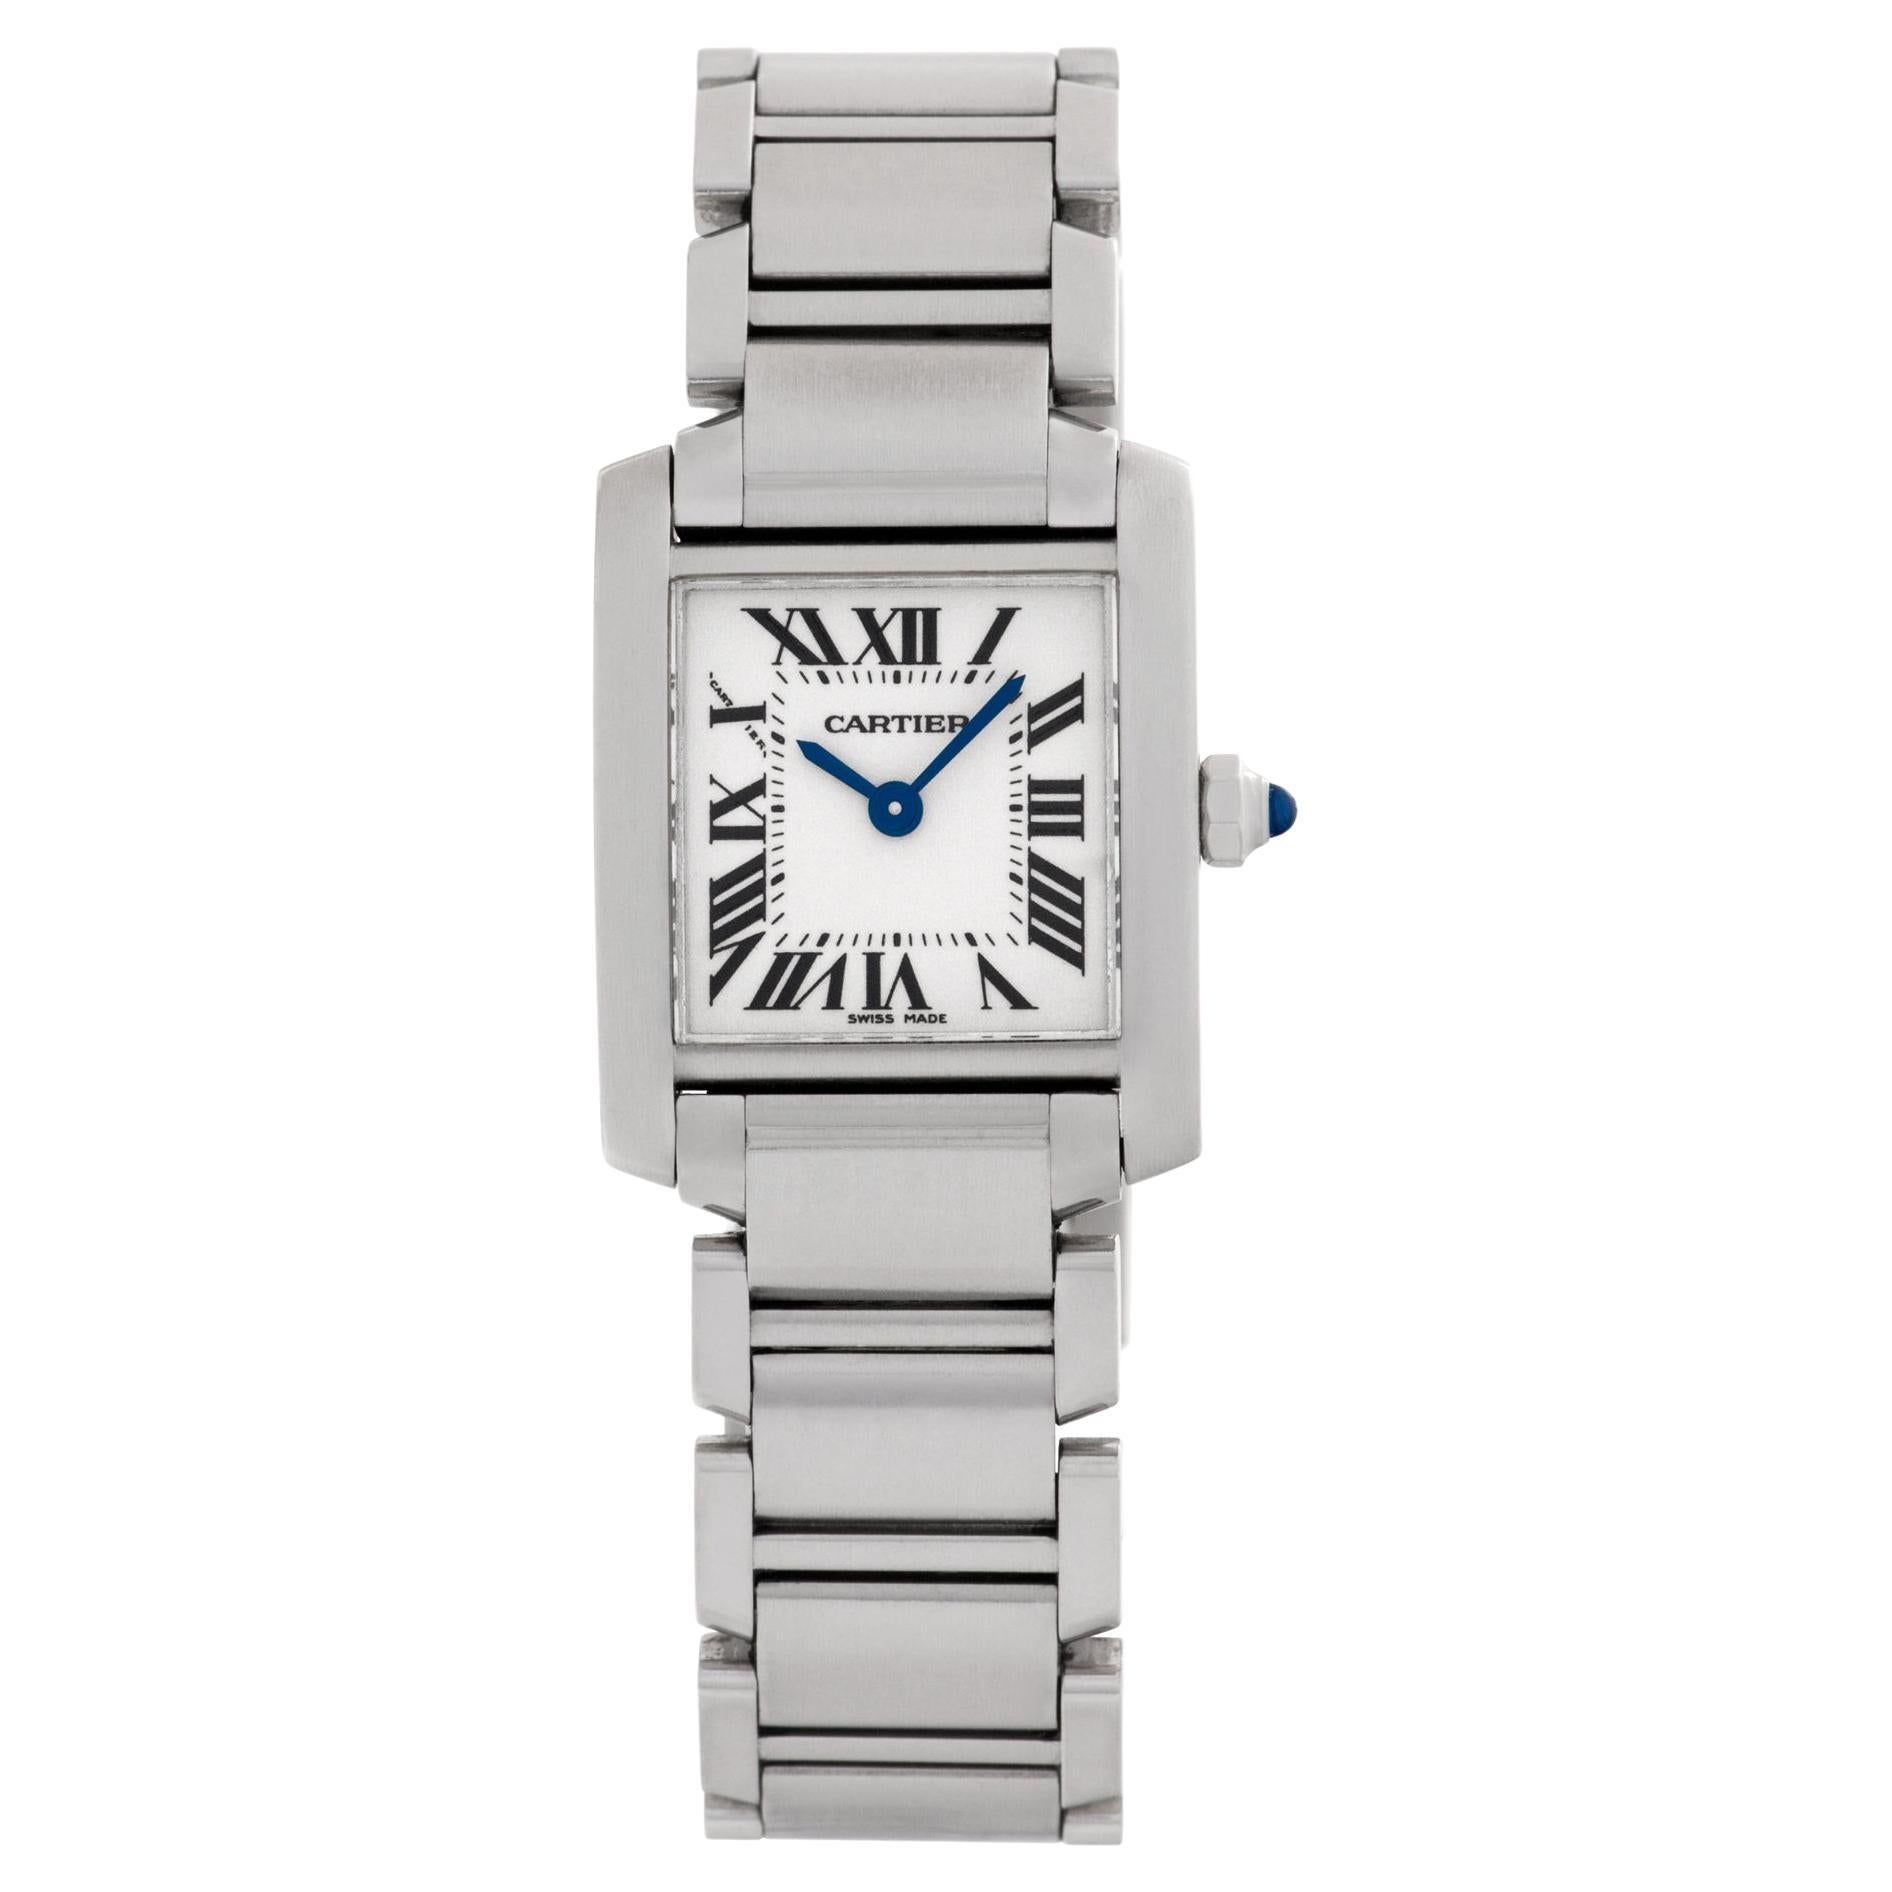 Cartier Tank Francaise W51008Q3 Stainless Steel Ivory Dial Quartz Watch